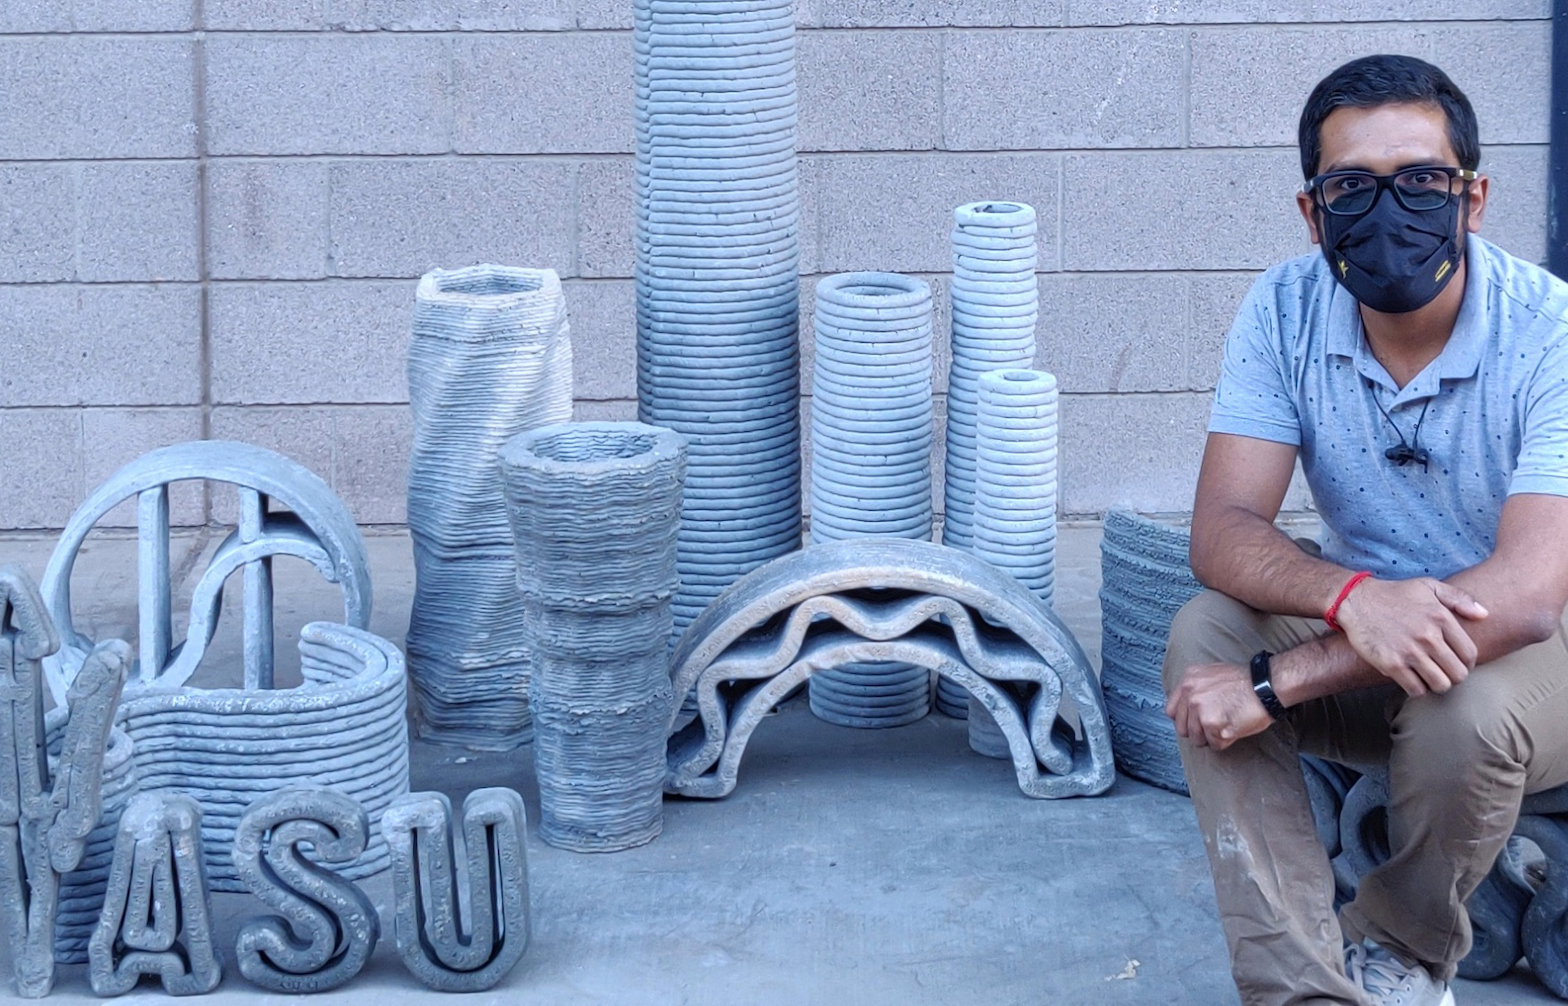 ASU has been granted $2 million to launch a research community as a means of exploring the potential of concrete 3D printing technologies. Photo via ASU.